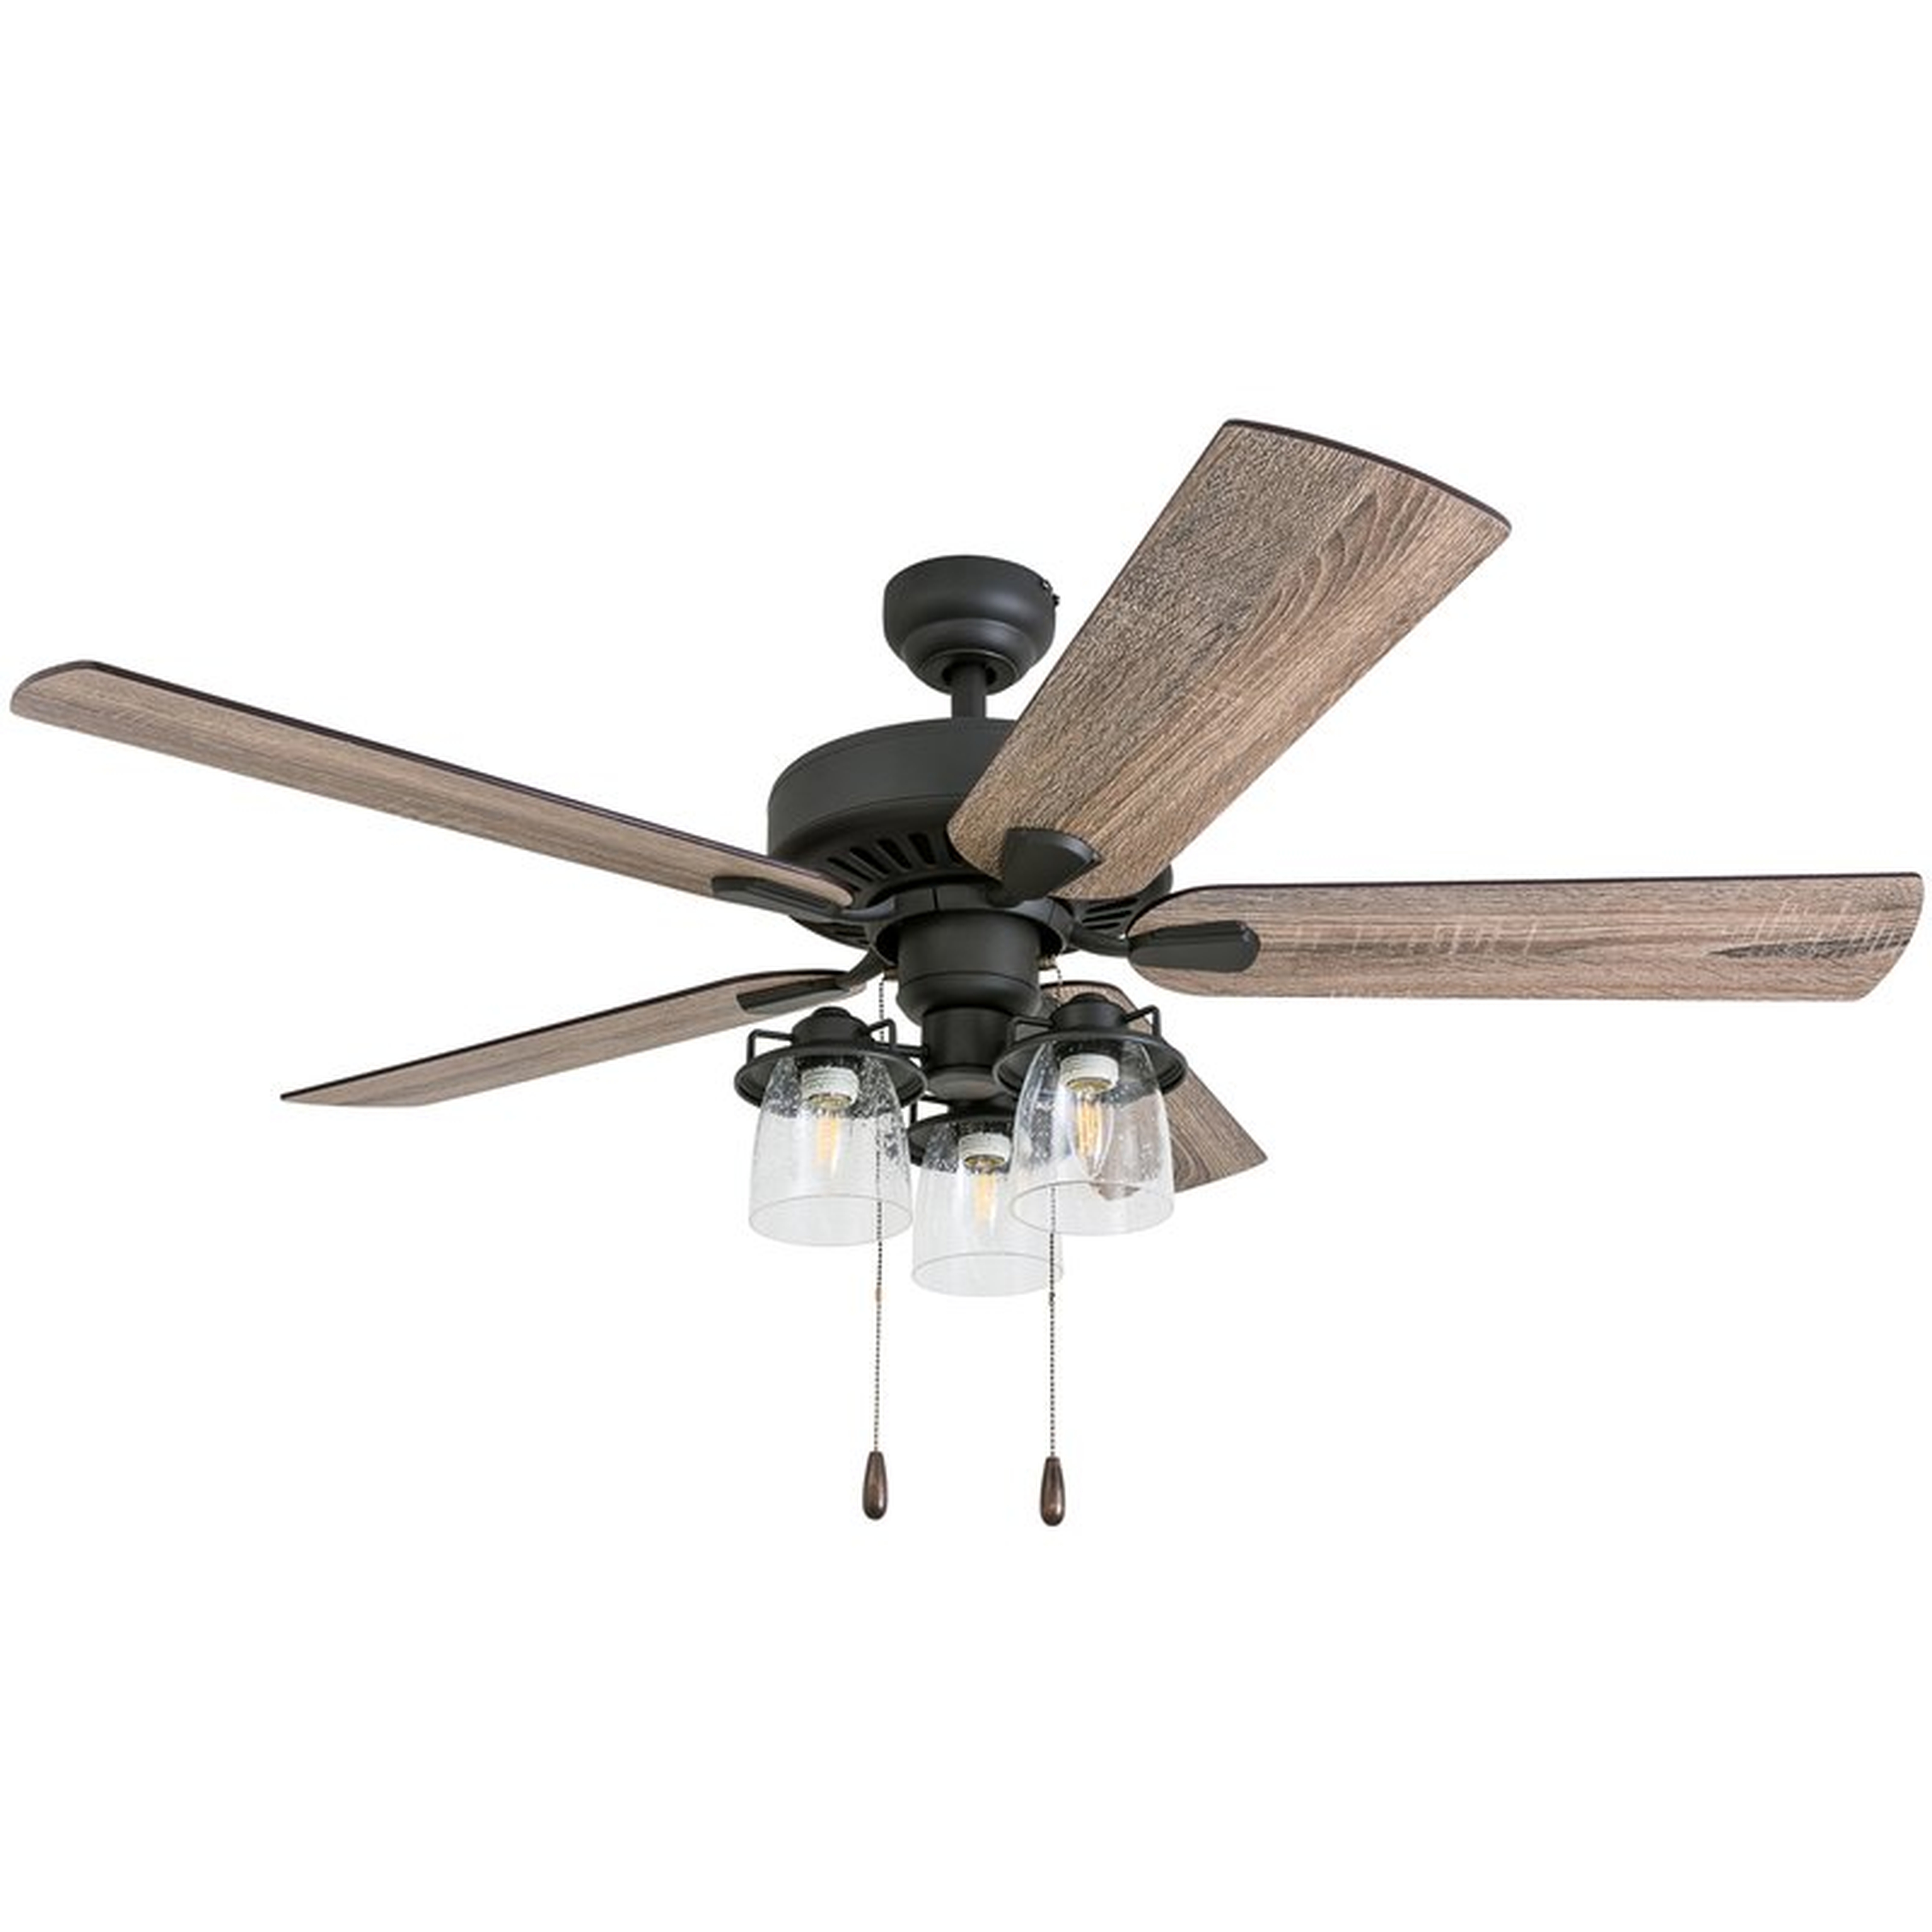 52" Sudie 5 Blade LED Ceiling Fan - with remote - Wayfair